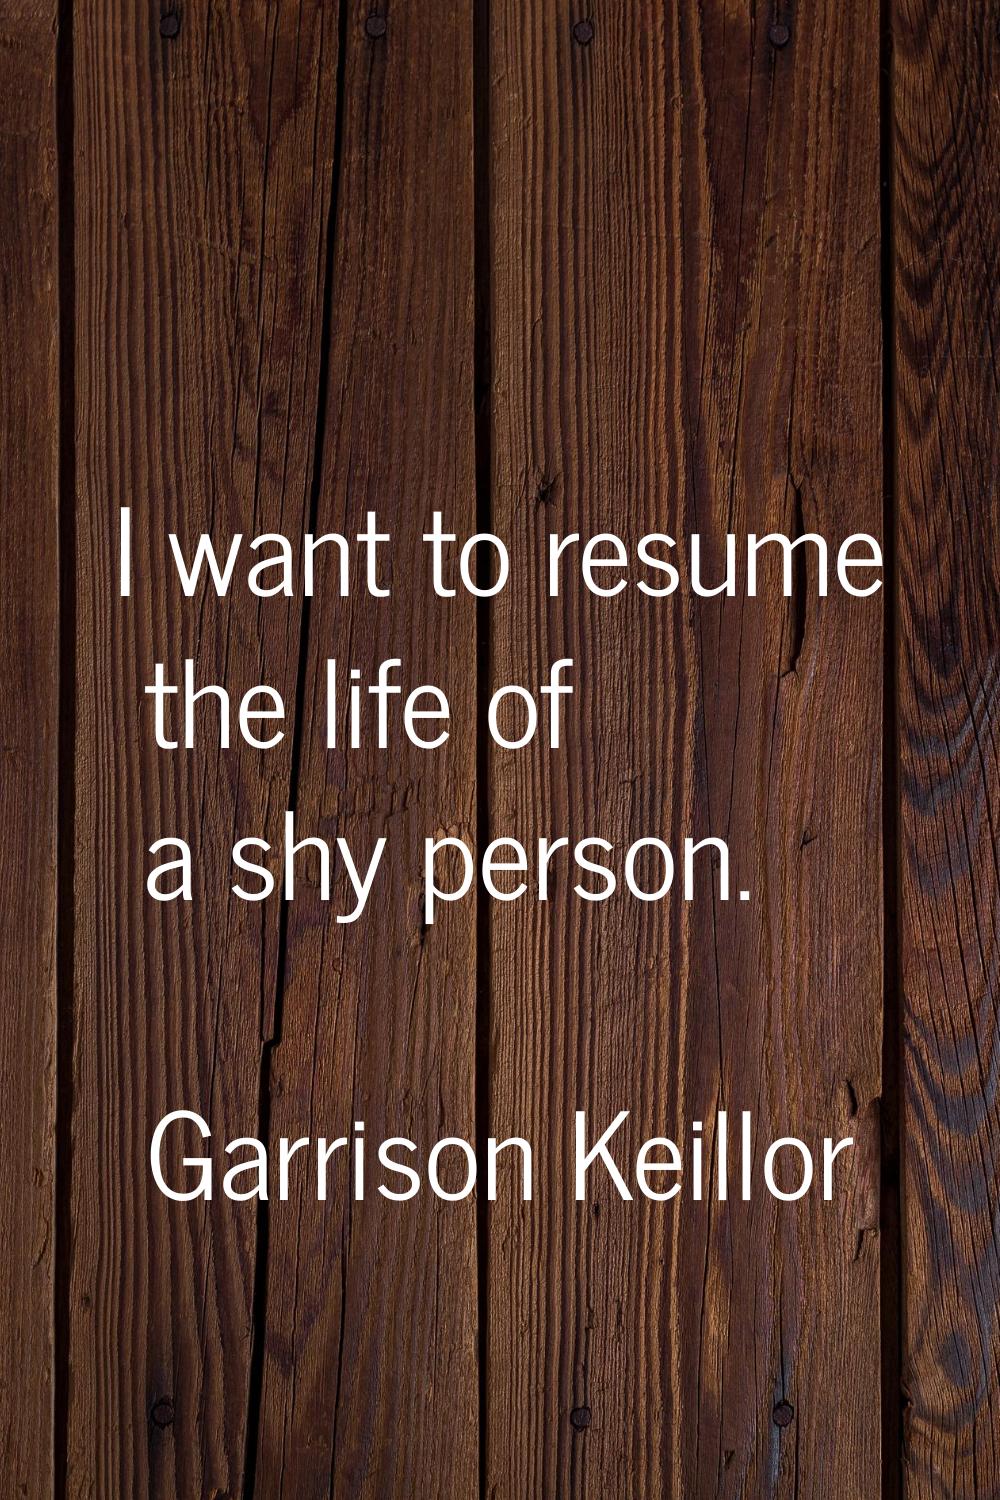 I want to resume the life of a shy person.